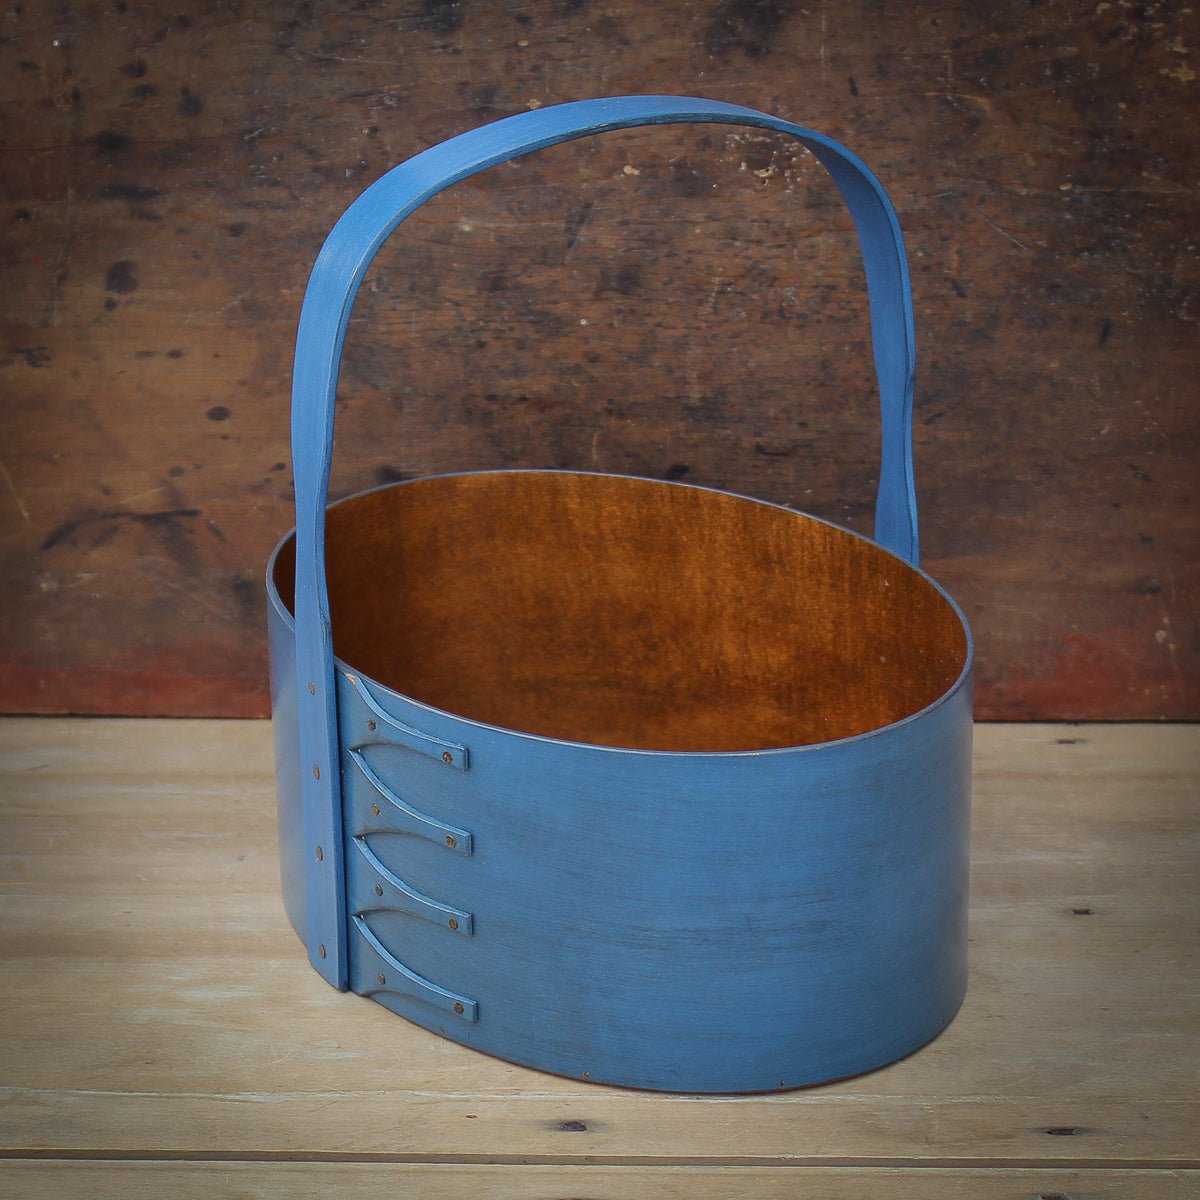 Shaker Carrier, Size #6, LeHays Shaker Boxes, Handcrafted in Maine, Blue Milk Paint Finish, Side View